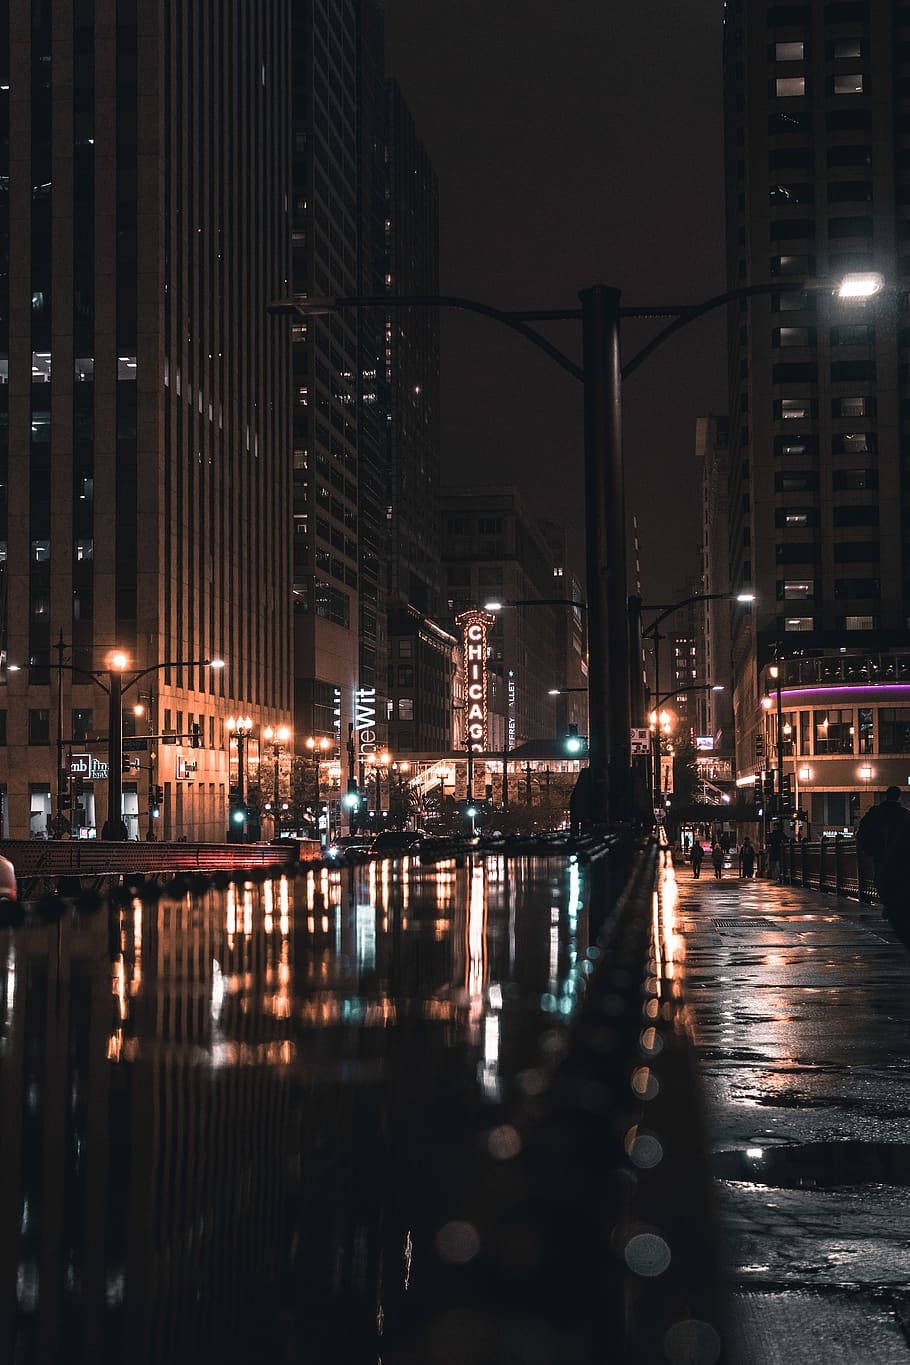 A city street at night with cars parked on the side - Chicago, rain